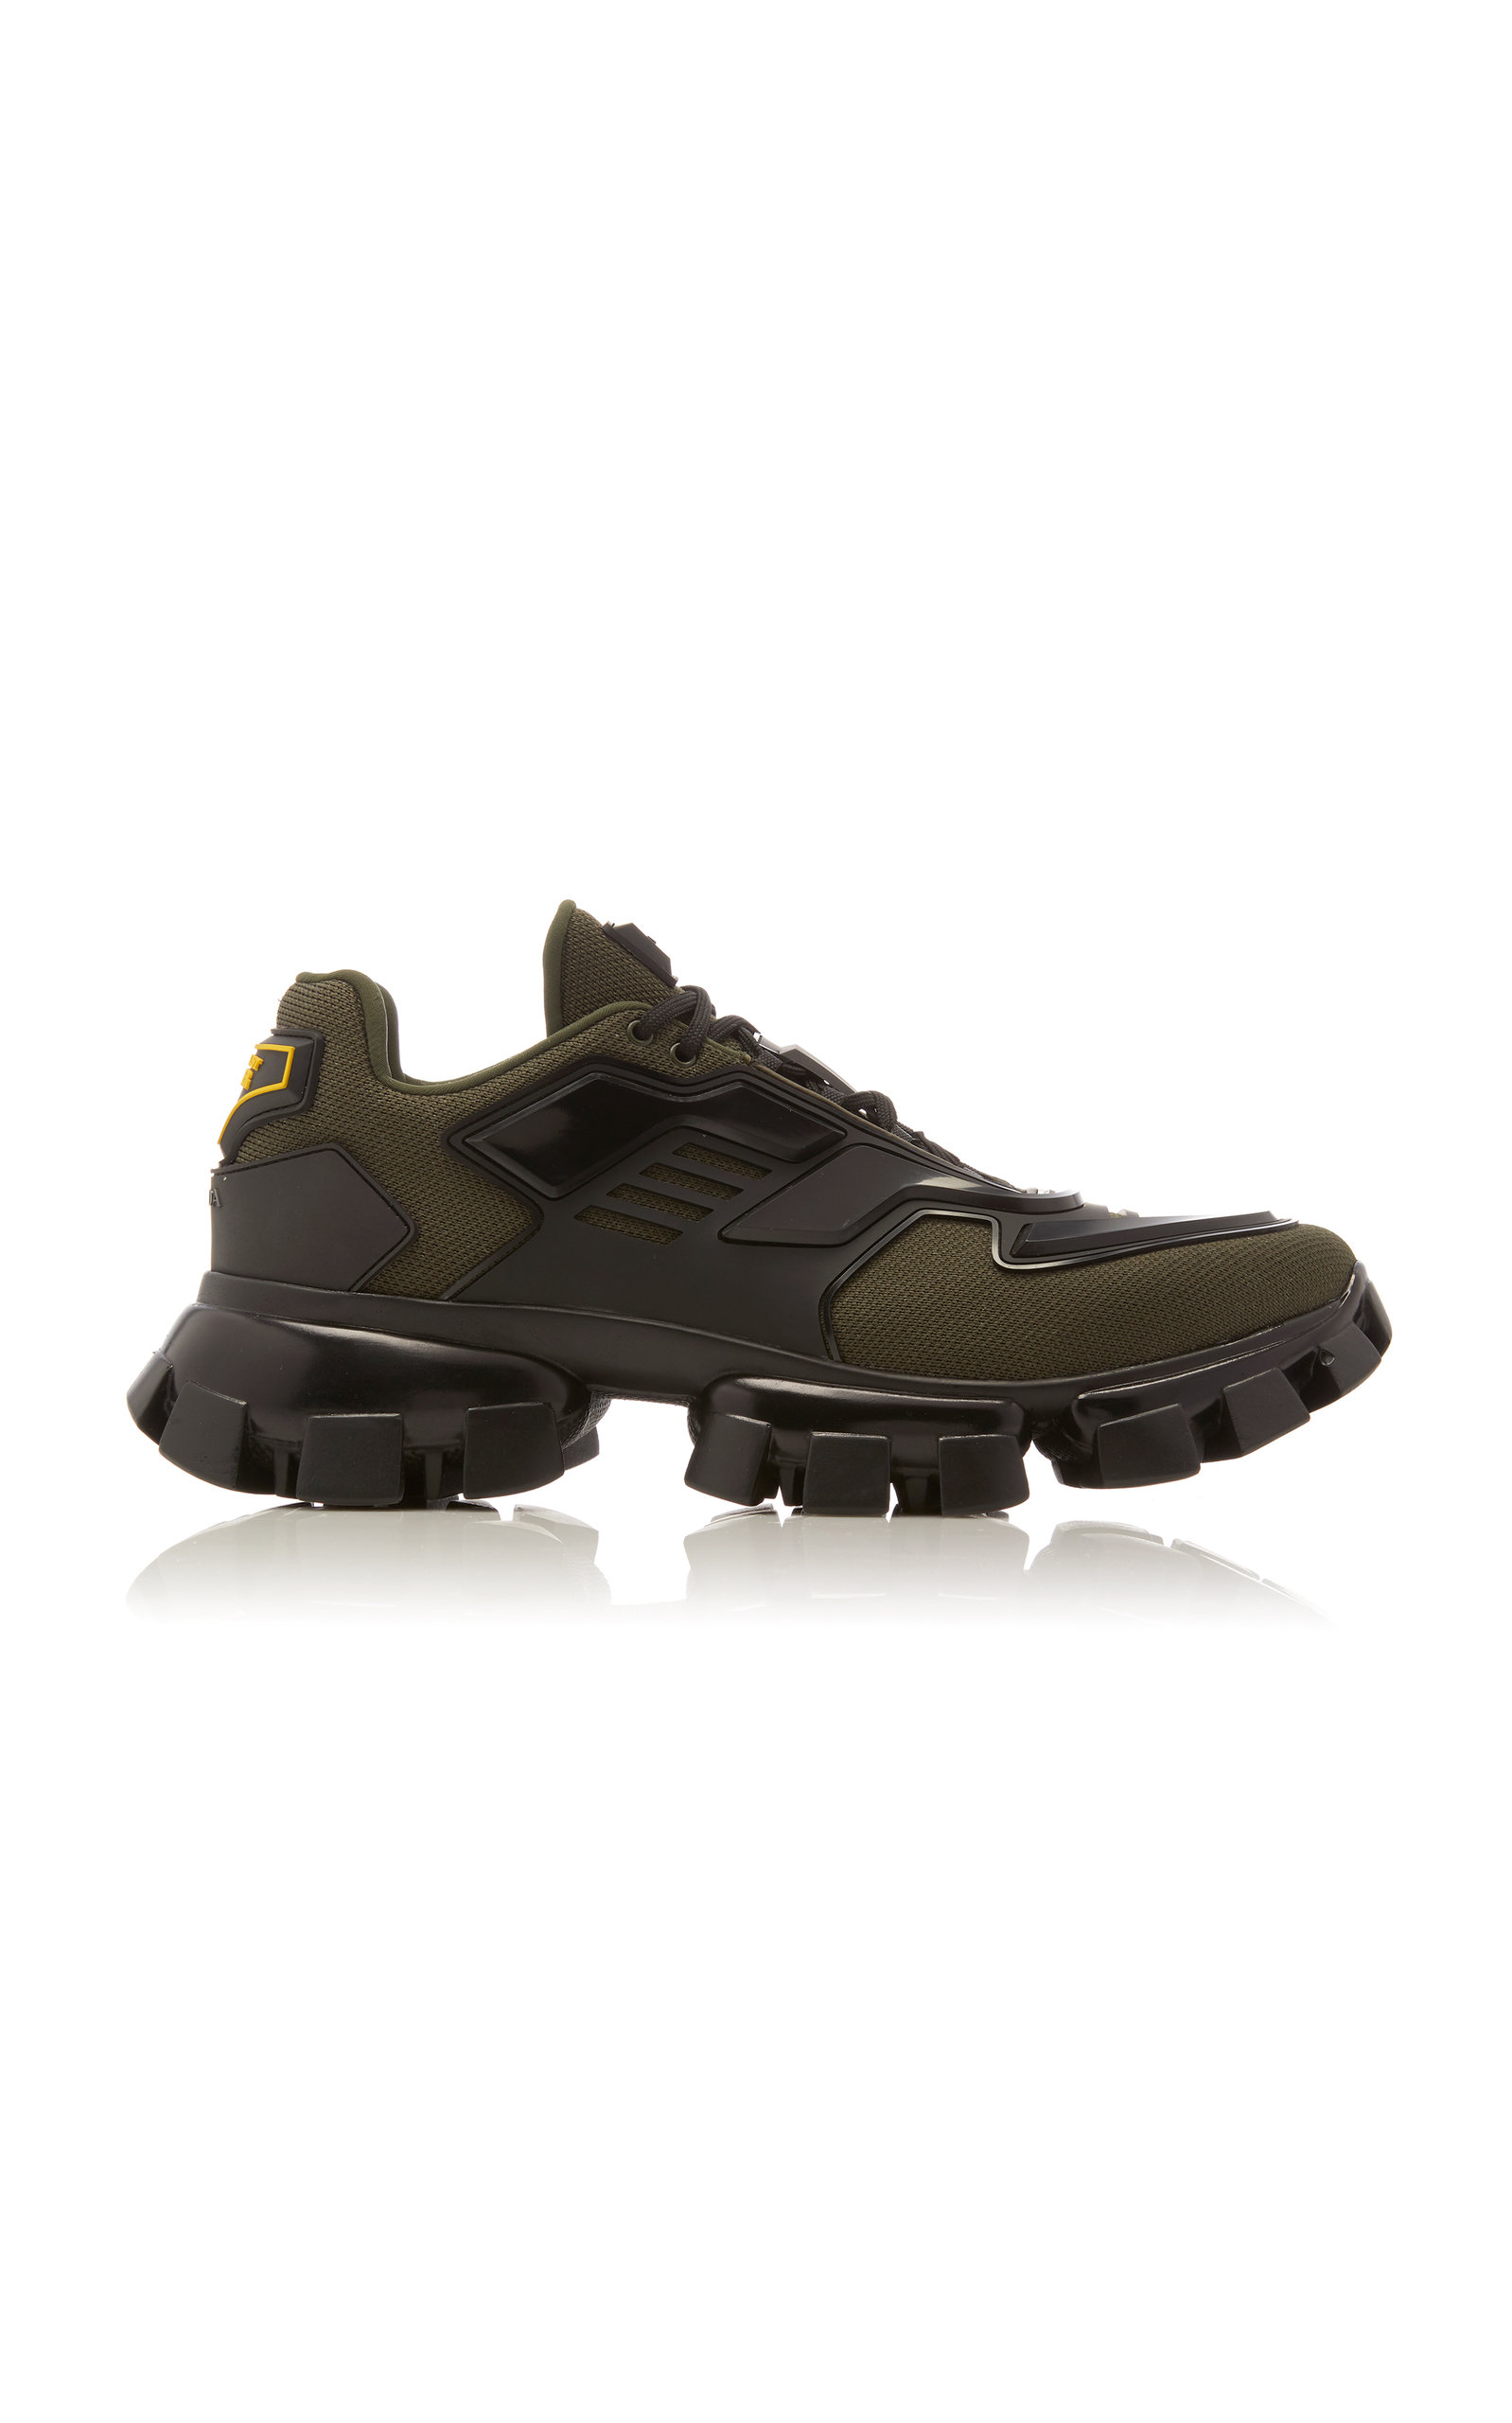 Prada's wildly popular Cloudbust Thunder sneaker is remixed in a fresh new color-way. The futuristic